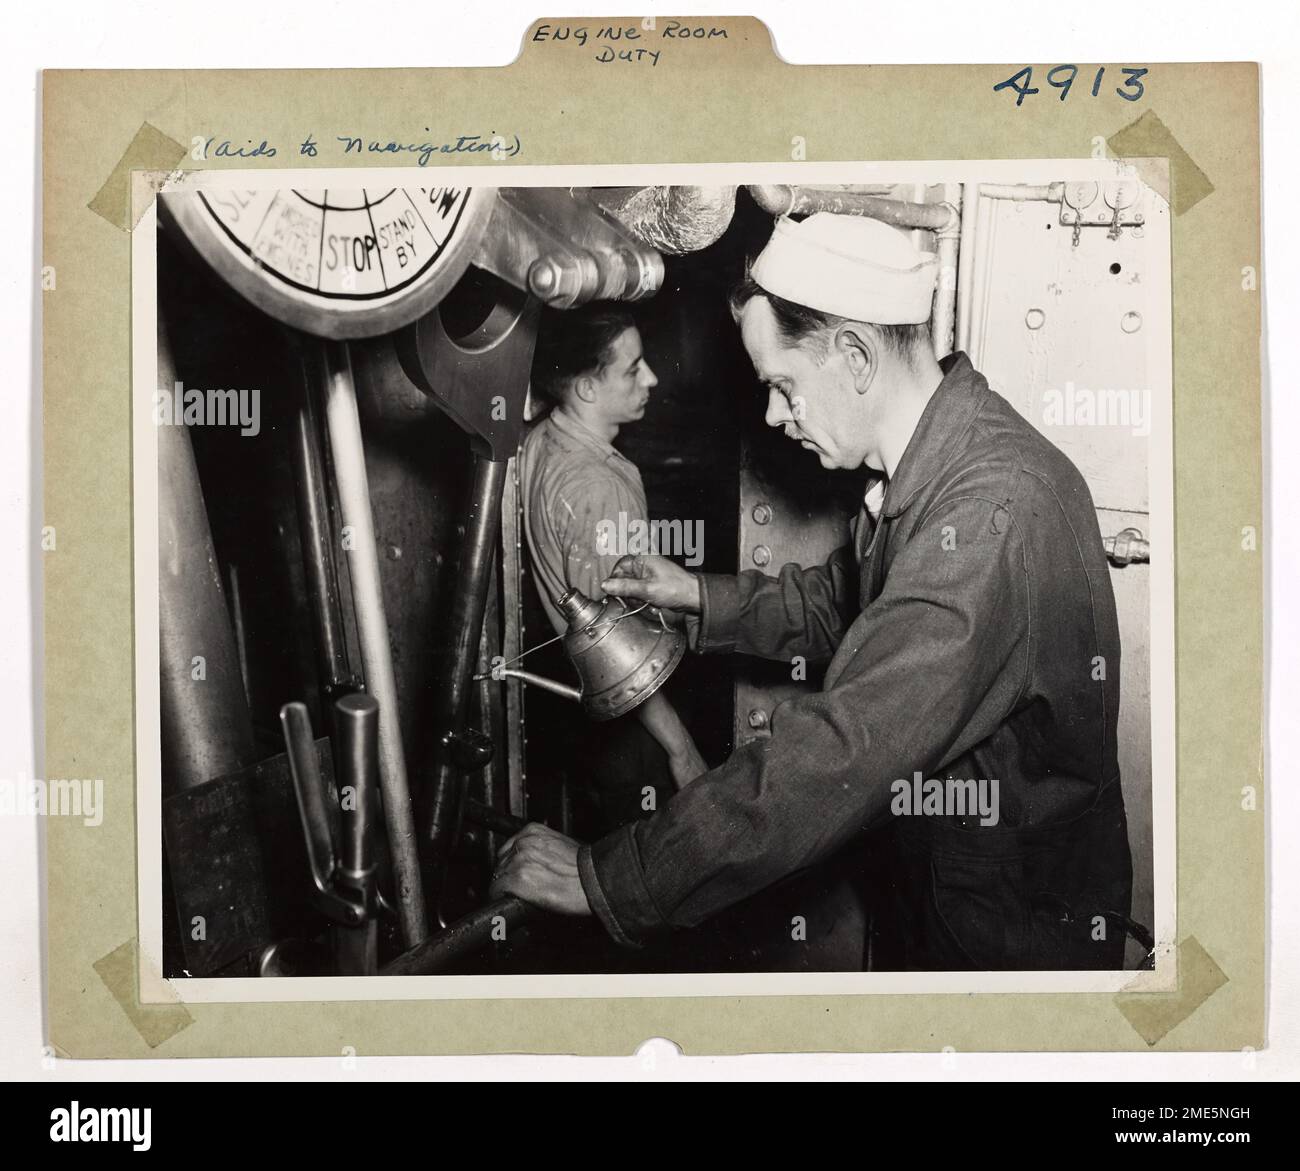 Engine Room Duty. An 'Oil Can Jockey' does his stuff on the valve gear of the main engines aboard the Coast Guard light ship 'Columbia River', No. 93. The home port of this ship is Astoria, Oregon. Stock Photo